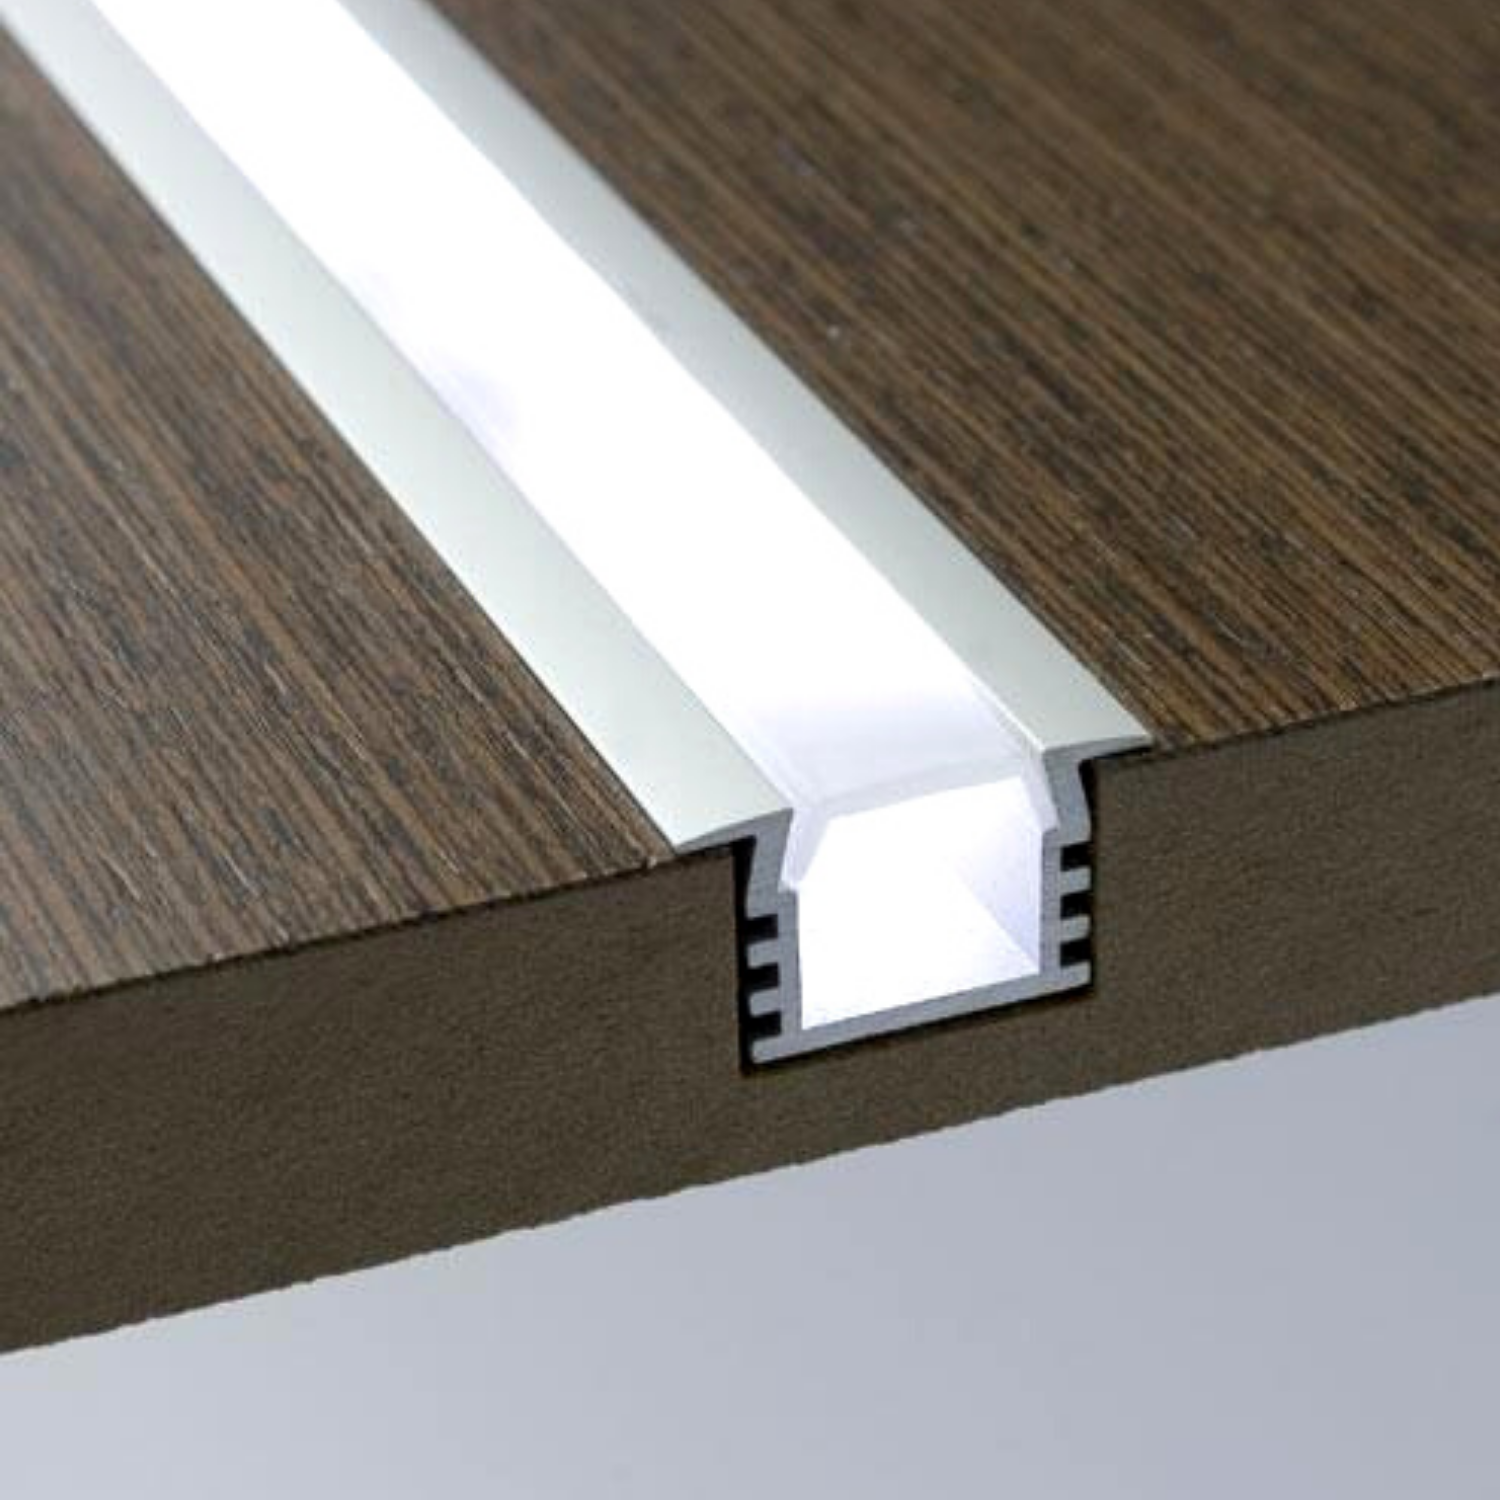 LED Strip Light Aluminium Recessed Profile Milky Cover Cabinet LED Channel - ATOM LED